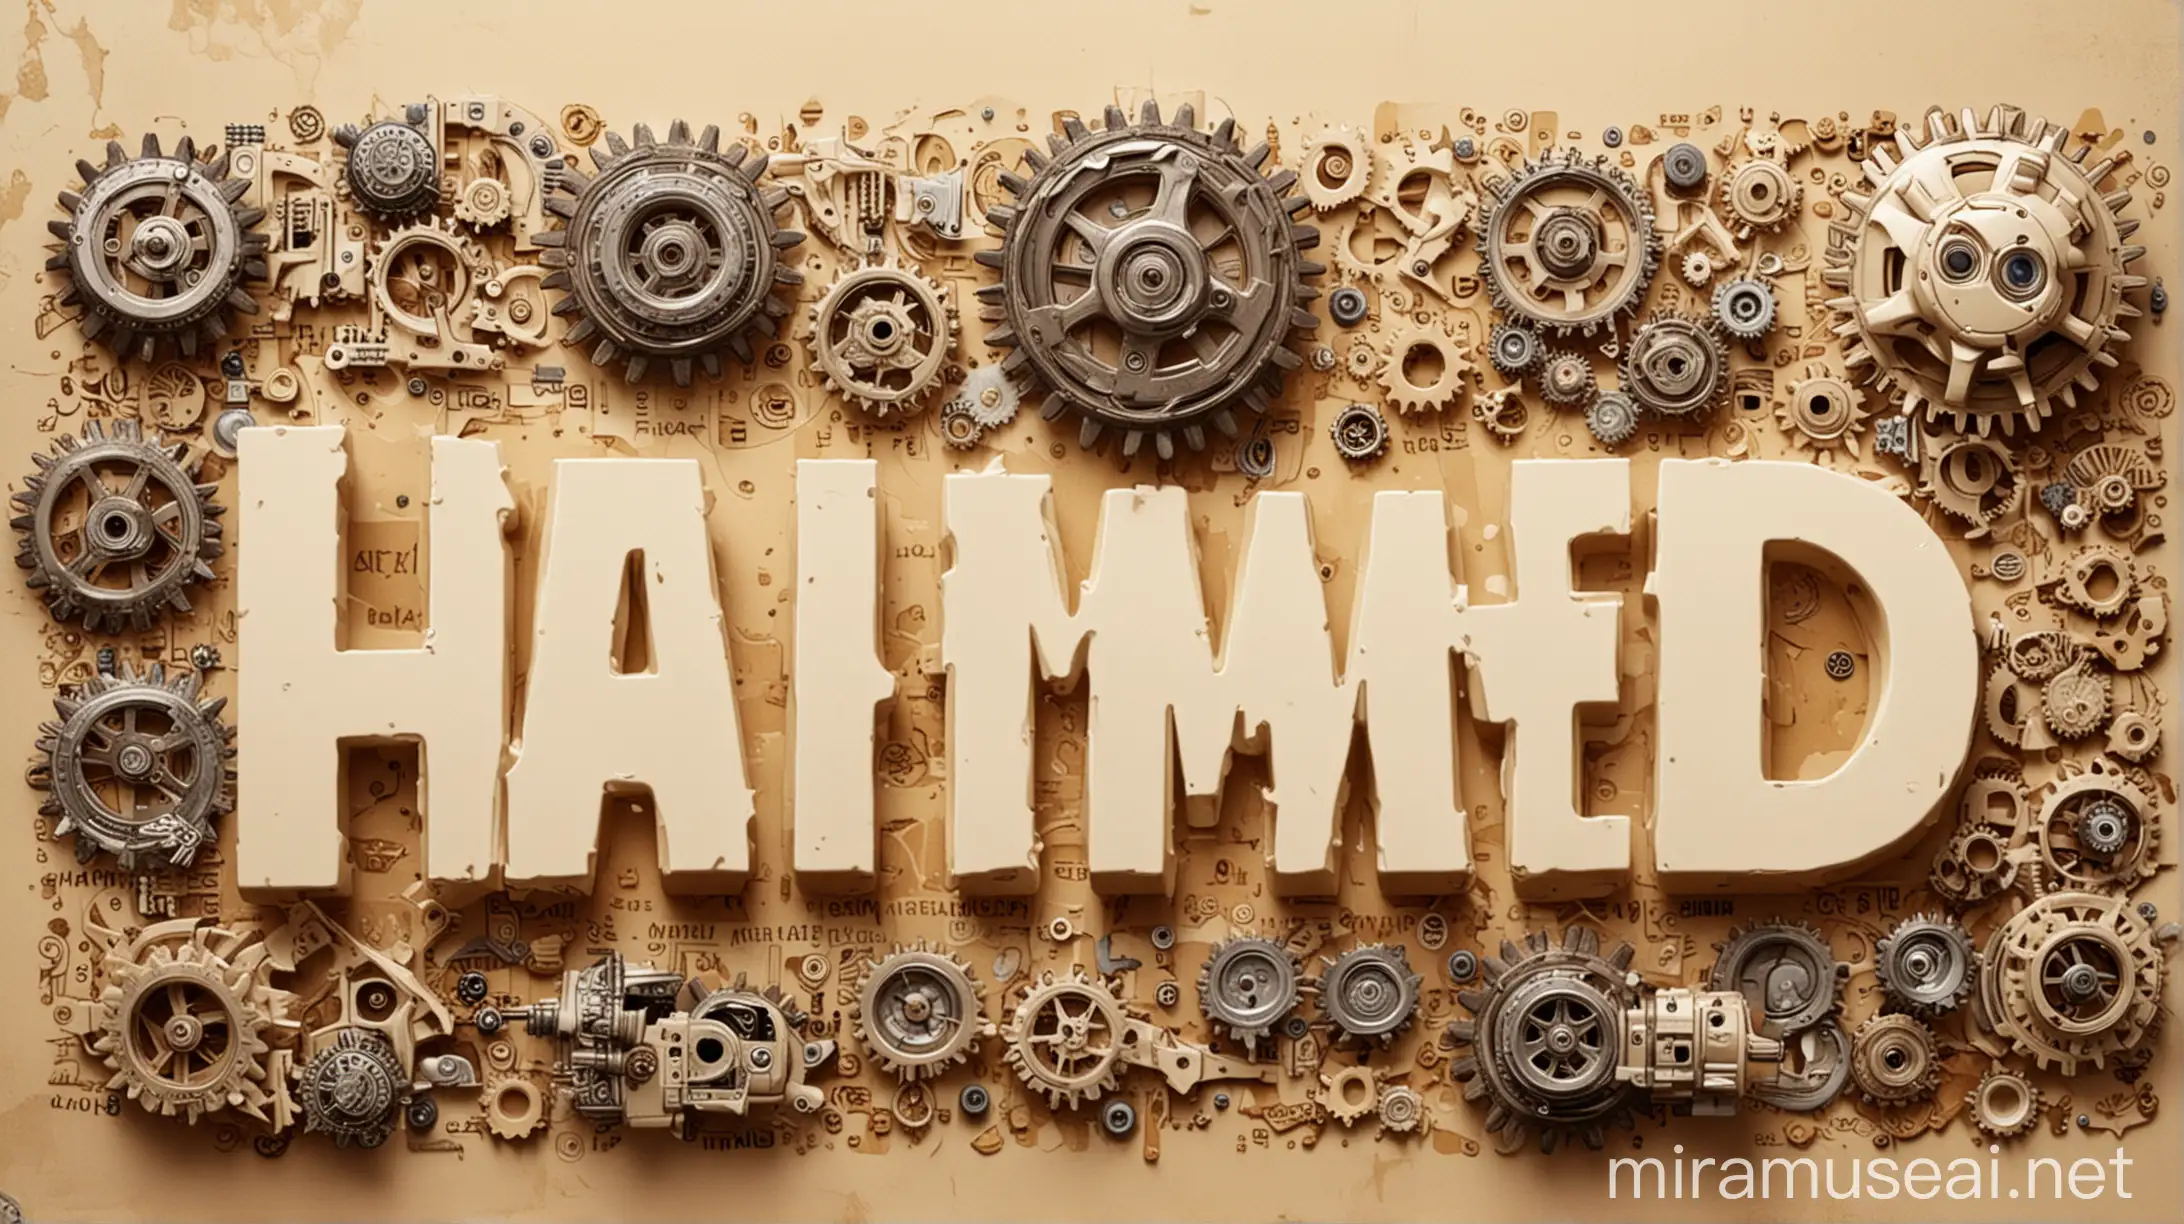 Mechanical Gears and Robot Figures on Cream Background with HAMED Sign